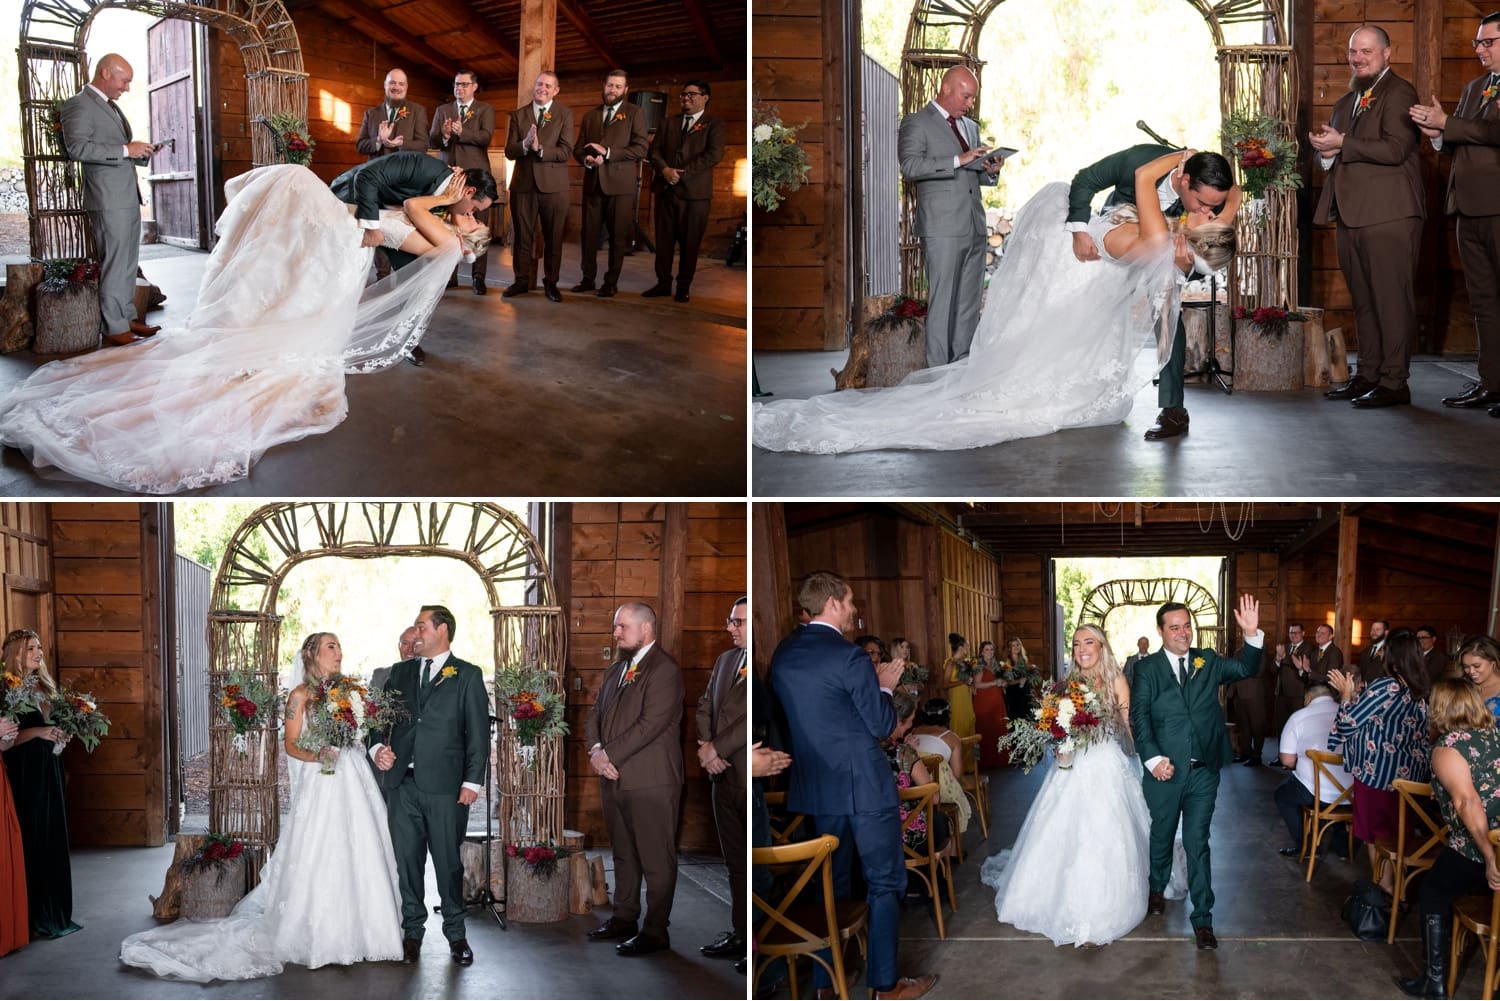 Bride and groom's first kiss in the barn at Ethereal Gardens. 